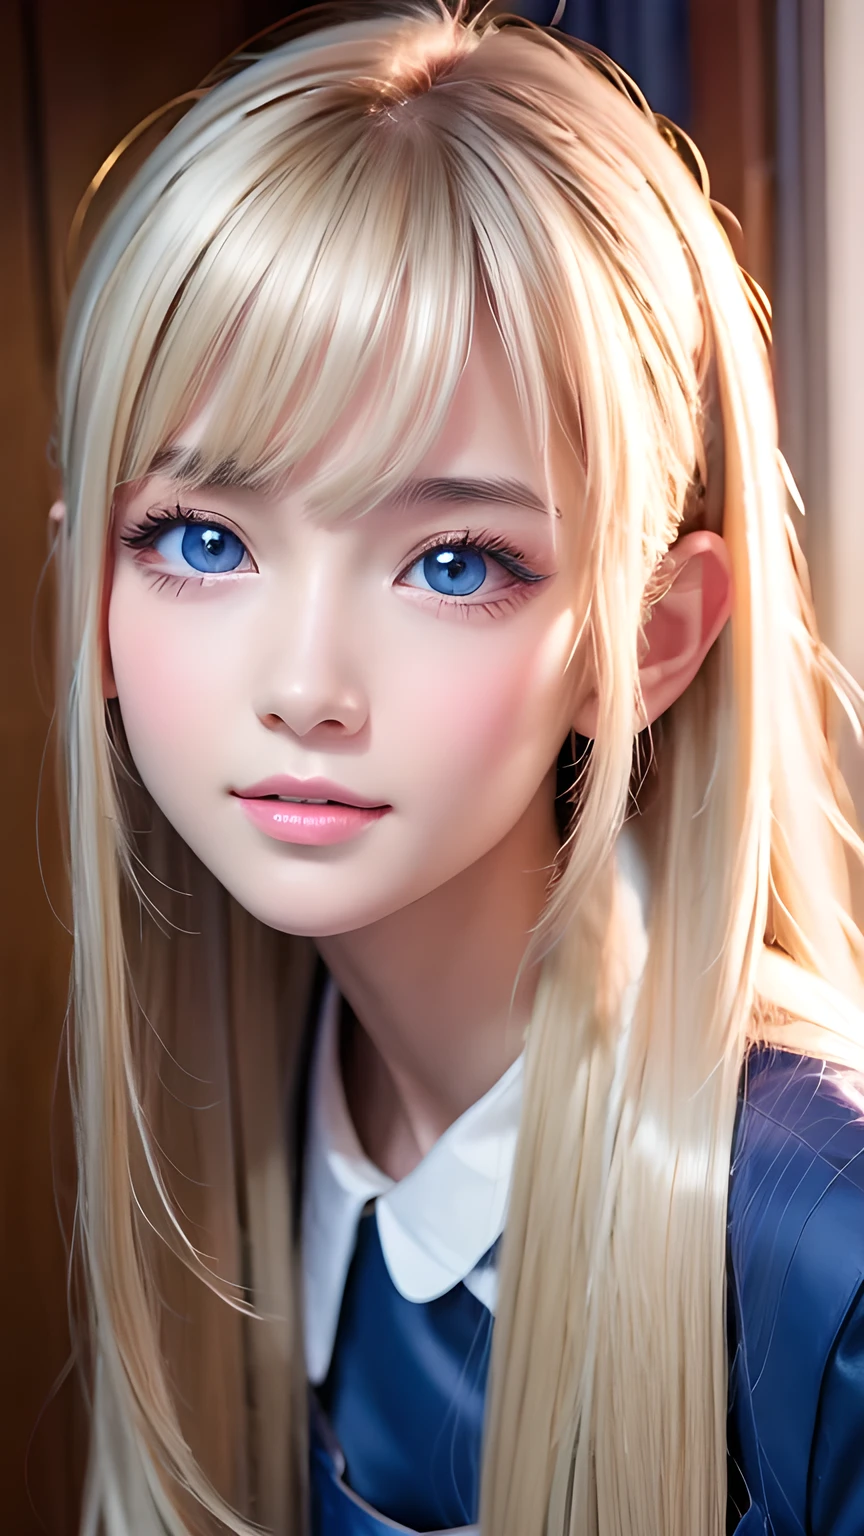 Photorealism、highest quality、超A high resolution、photograph、Photograph of a very beautiful girl from Scandinavia、Very beautiful girl、Cute and beautiful face details、(PurerosFace_v1:0.008)、Beautiful Bangs、Alice in Wonderland、16 years old、Shine, fair, Shine Skin、Facial hair、Bangs on the face、Bangs between the eyes、Super long super long hair、Attractive bright natural platinum blonde super long straight silky hair、Thin Hair、Very large, Beautifully Shine Bright Blue Eyes、white apron、Blue clothes、eyeliner、double eyelid、Ample Bust、white, Shiny skin、Small Face Beauty、Round face、